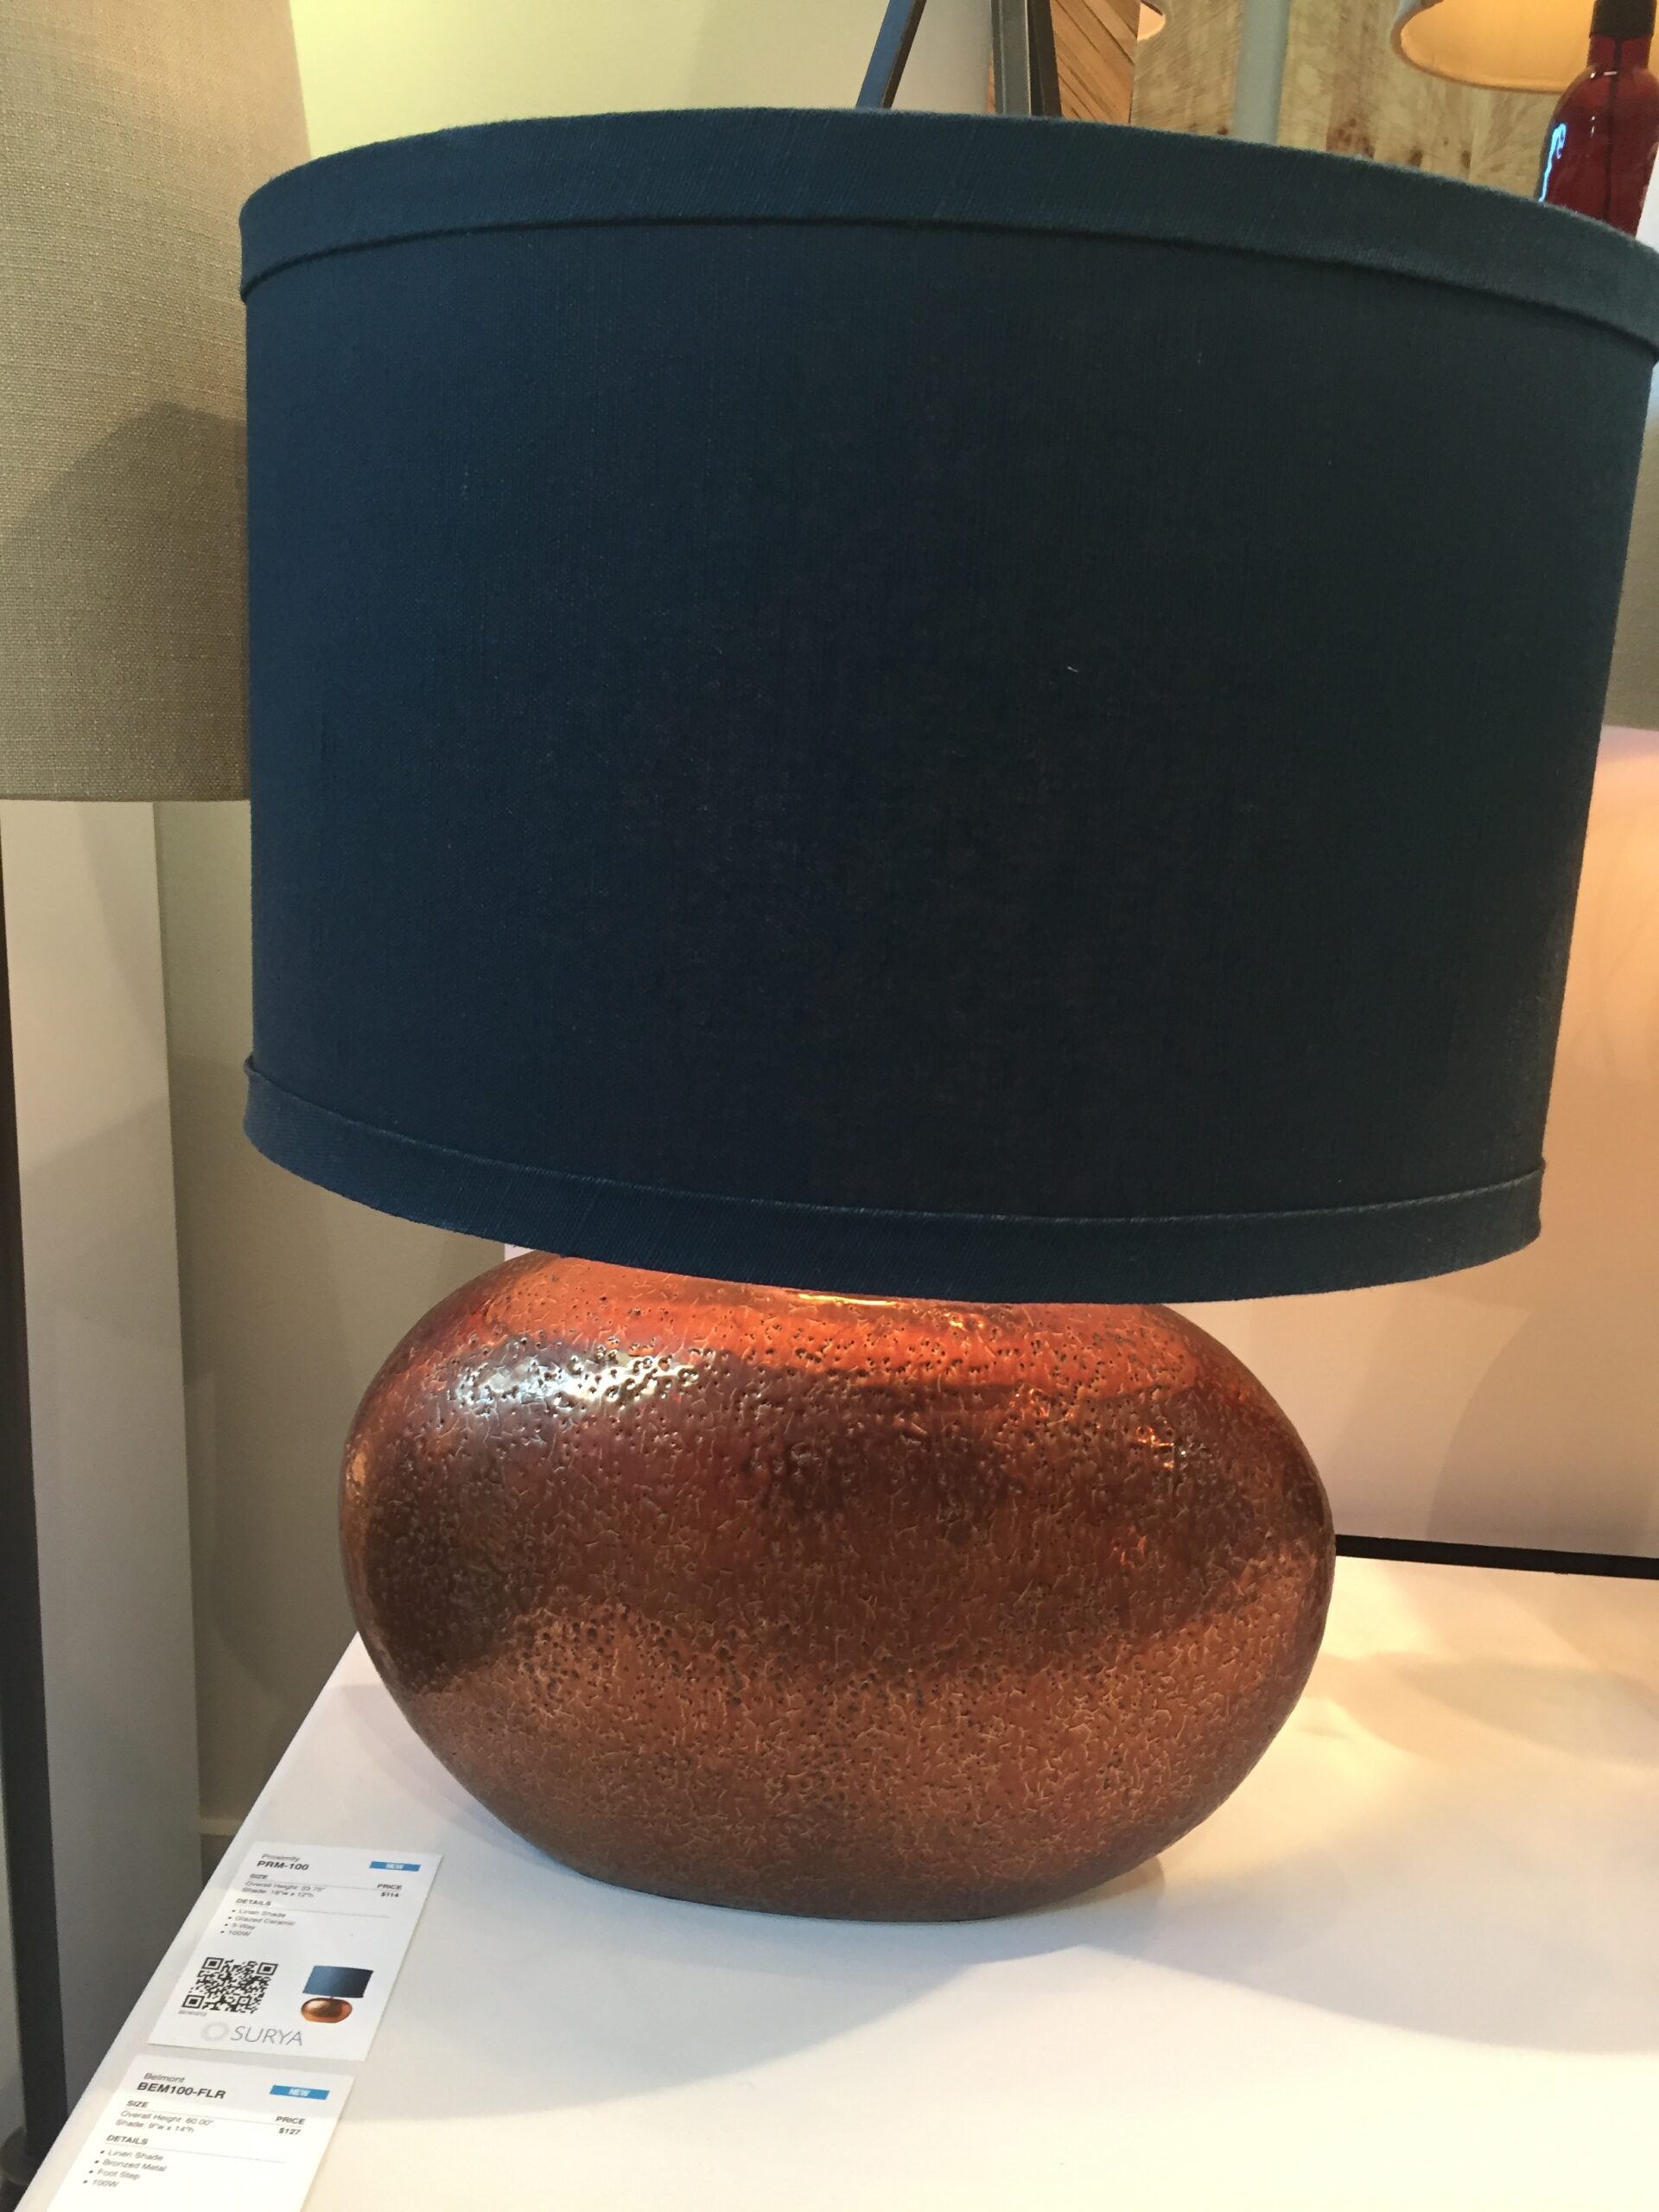 Bold and brassy...well...copper ceramic really! The bold navy blue shade and copper ceramic base from Surya is stunning!